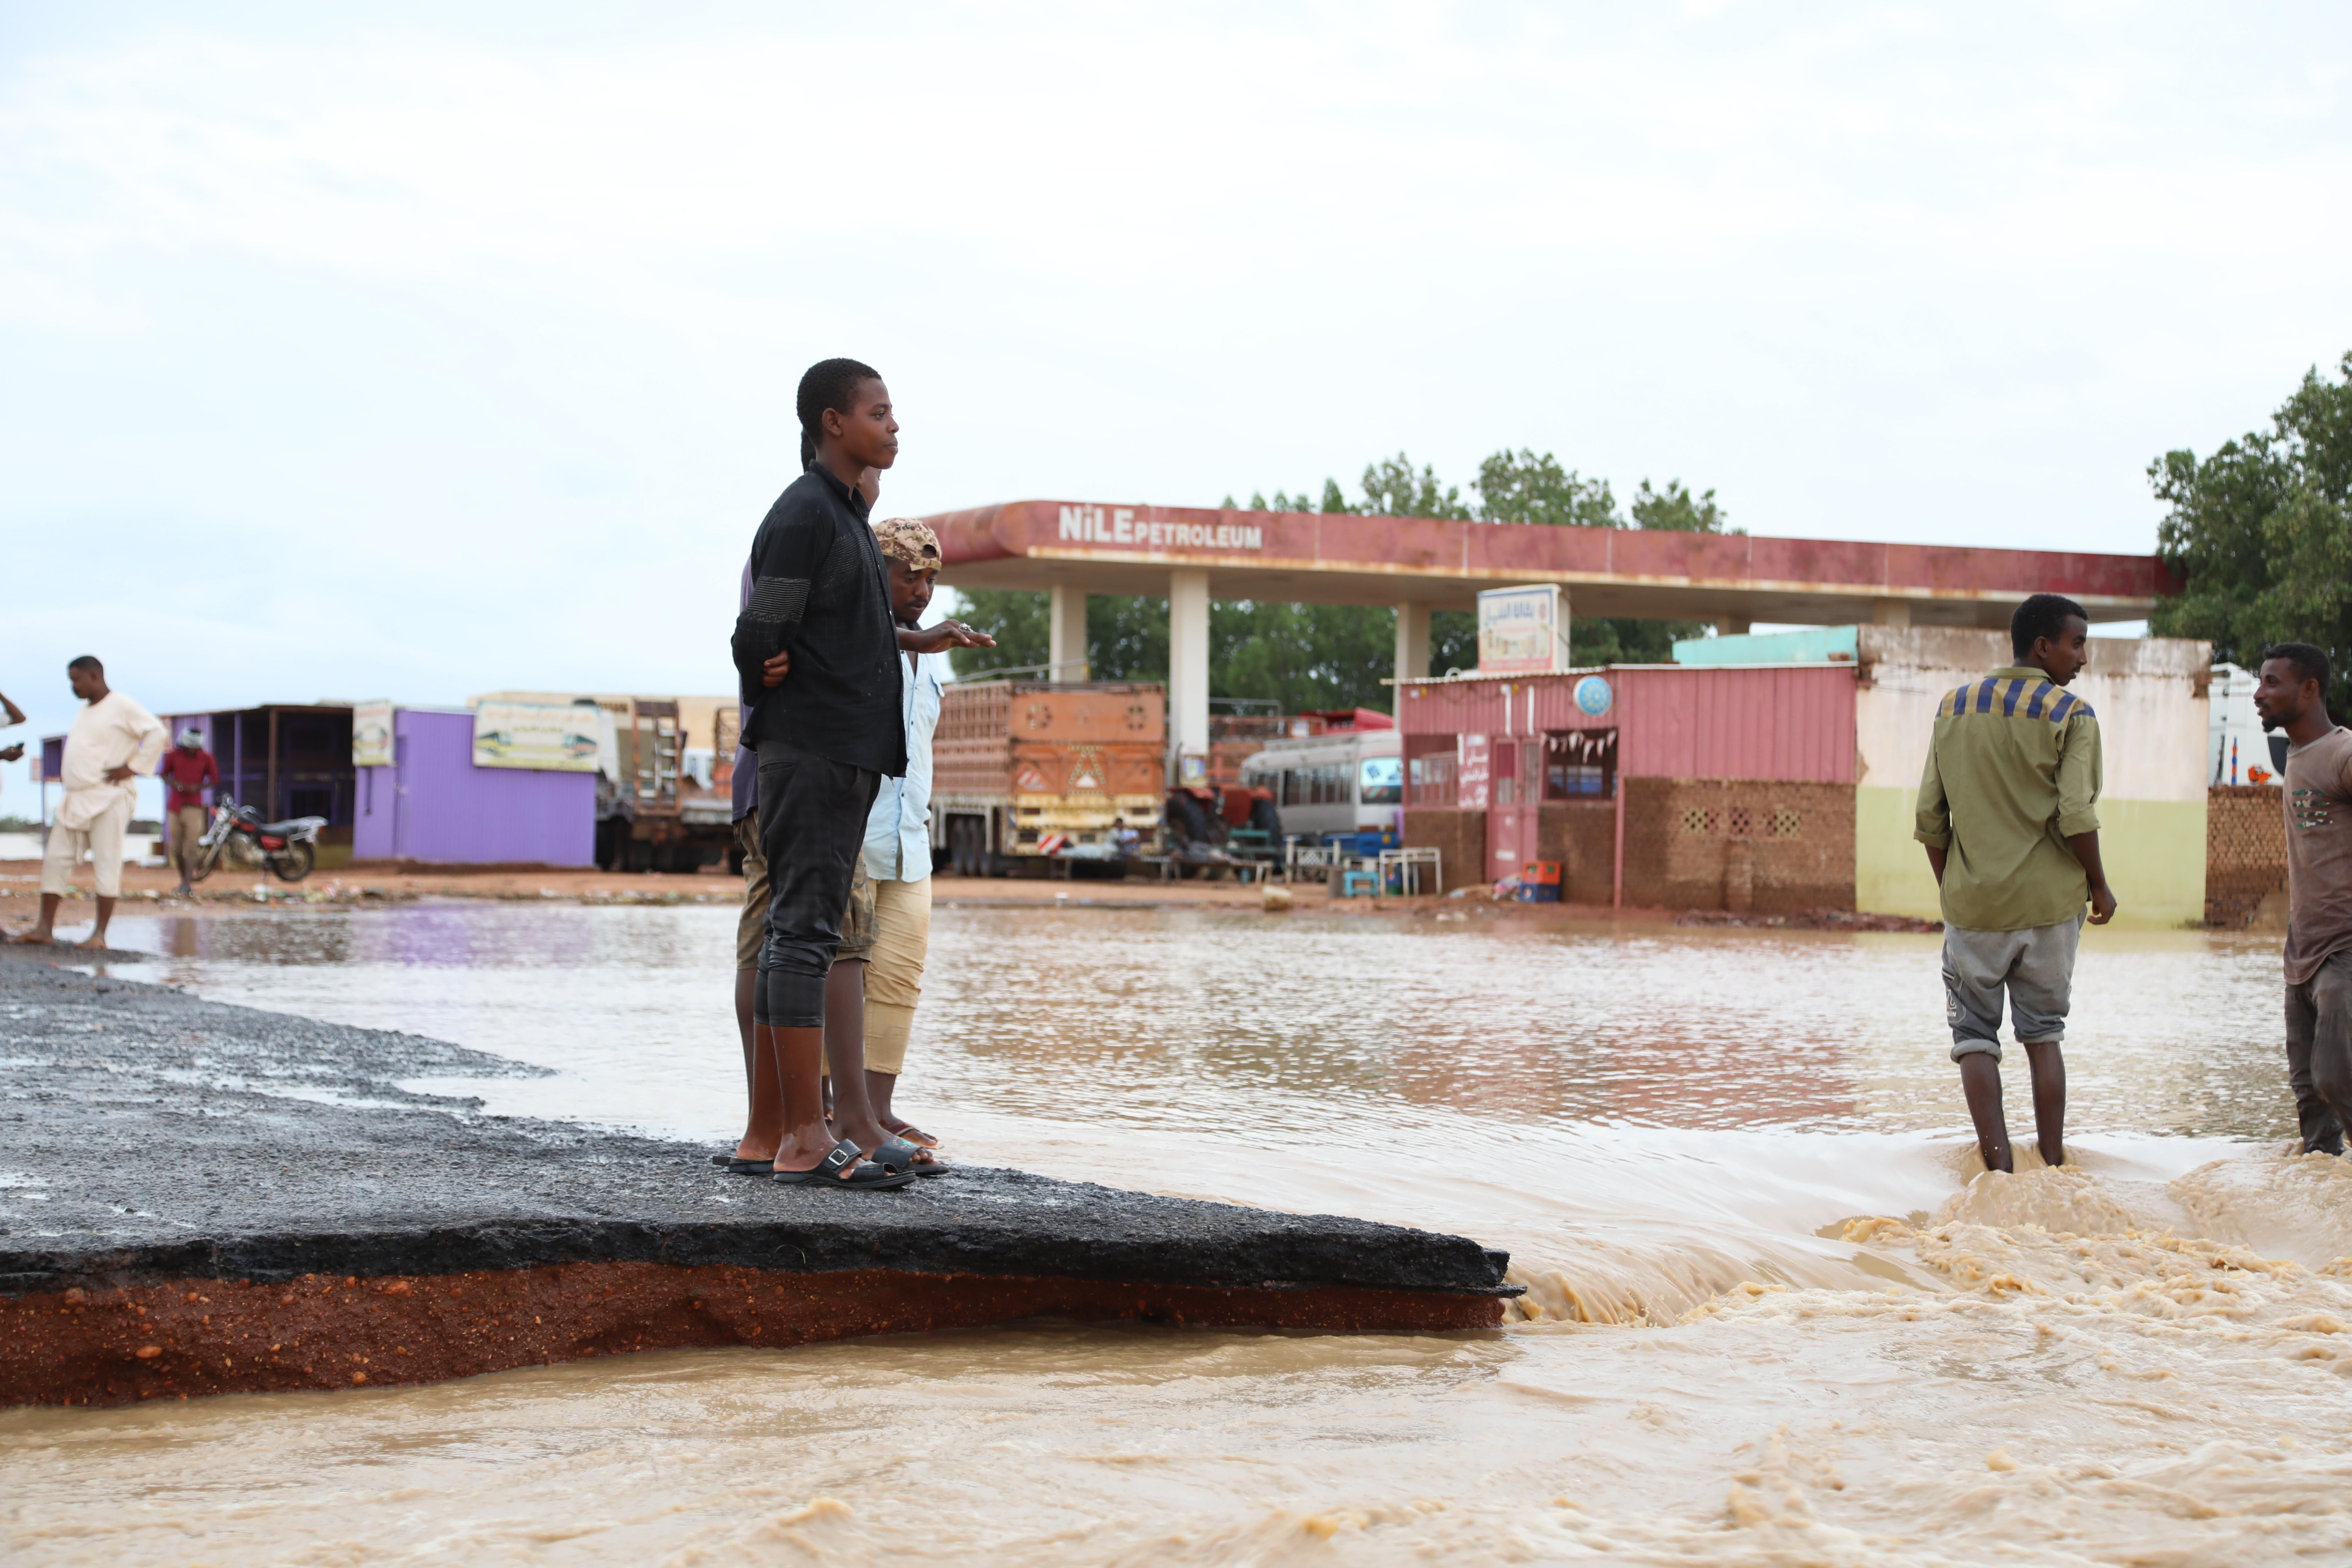 People stand on a damaged road after deadly flooding in Al Jazirah, Sudan on August 20, 2022.